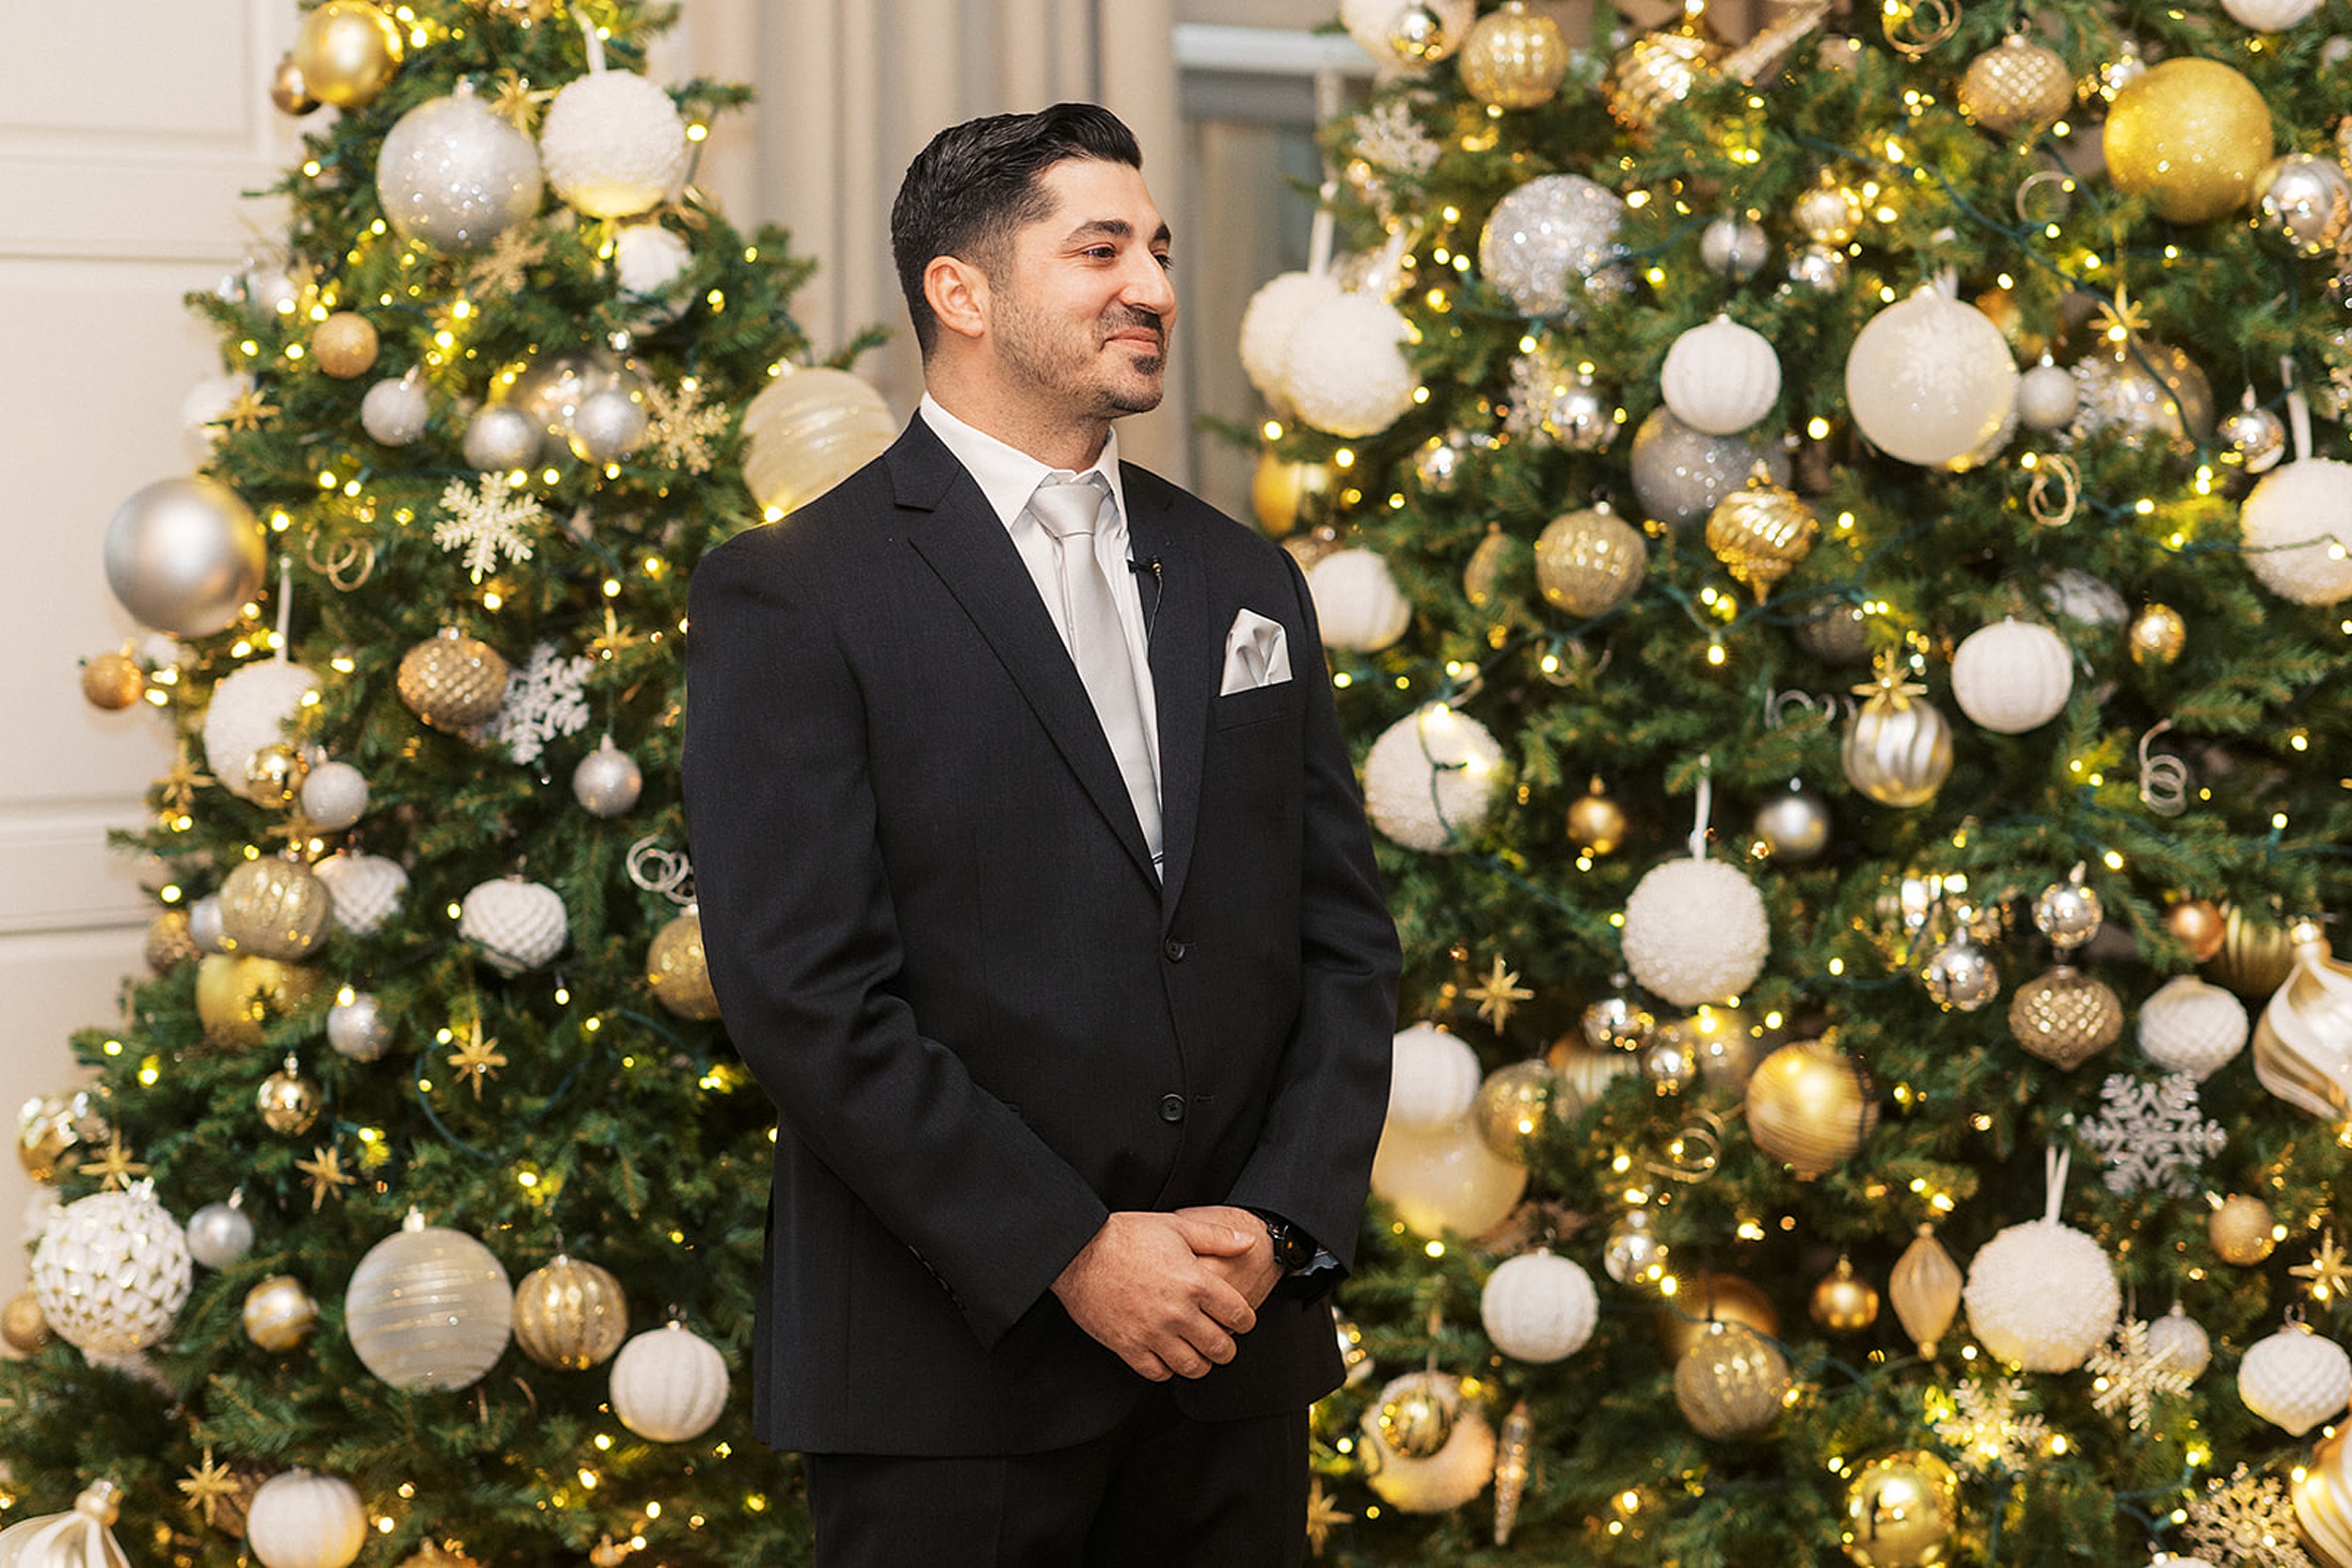 A groom smiles in front of christmas trees with gold and white ornaments while wearing a black suit and silver tie